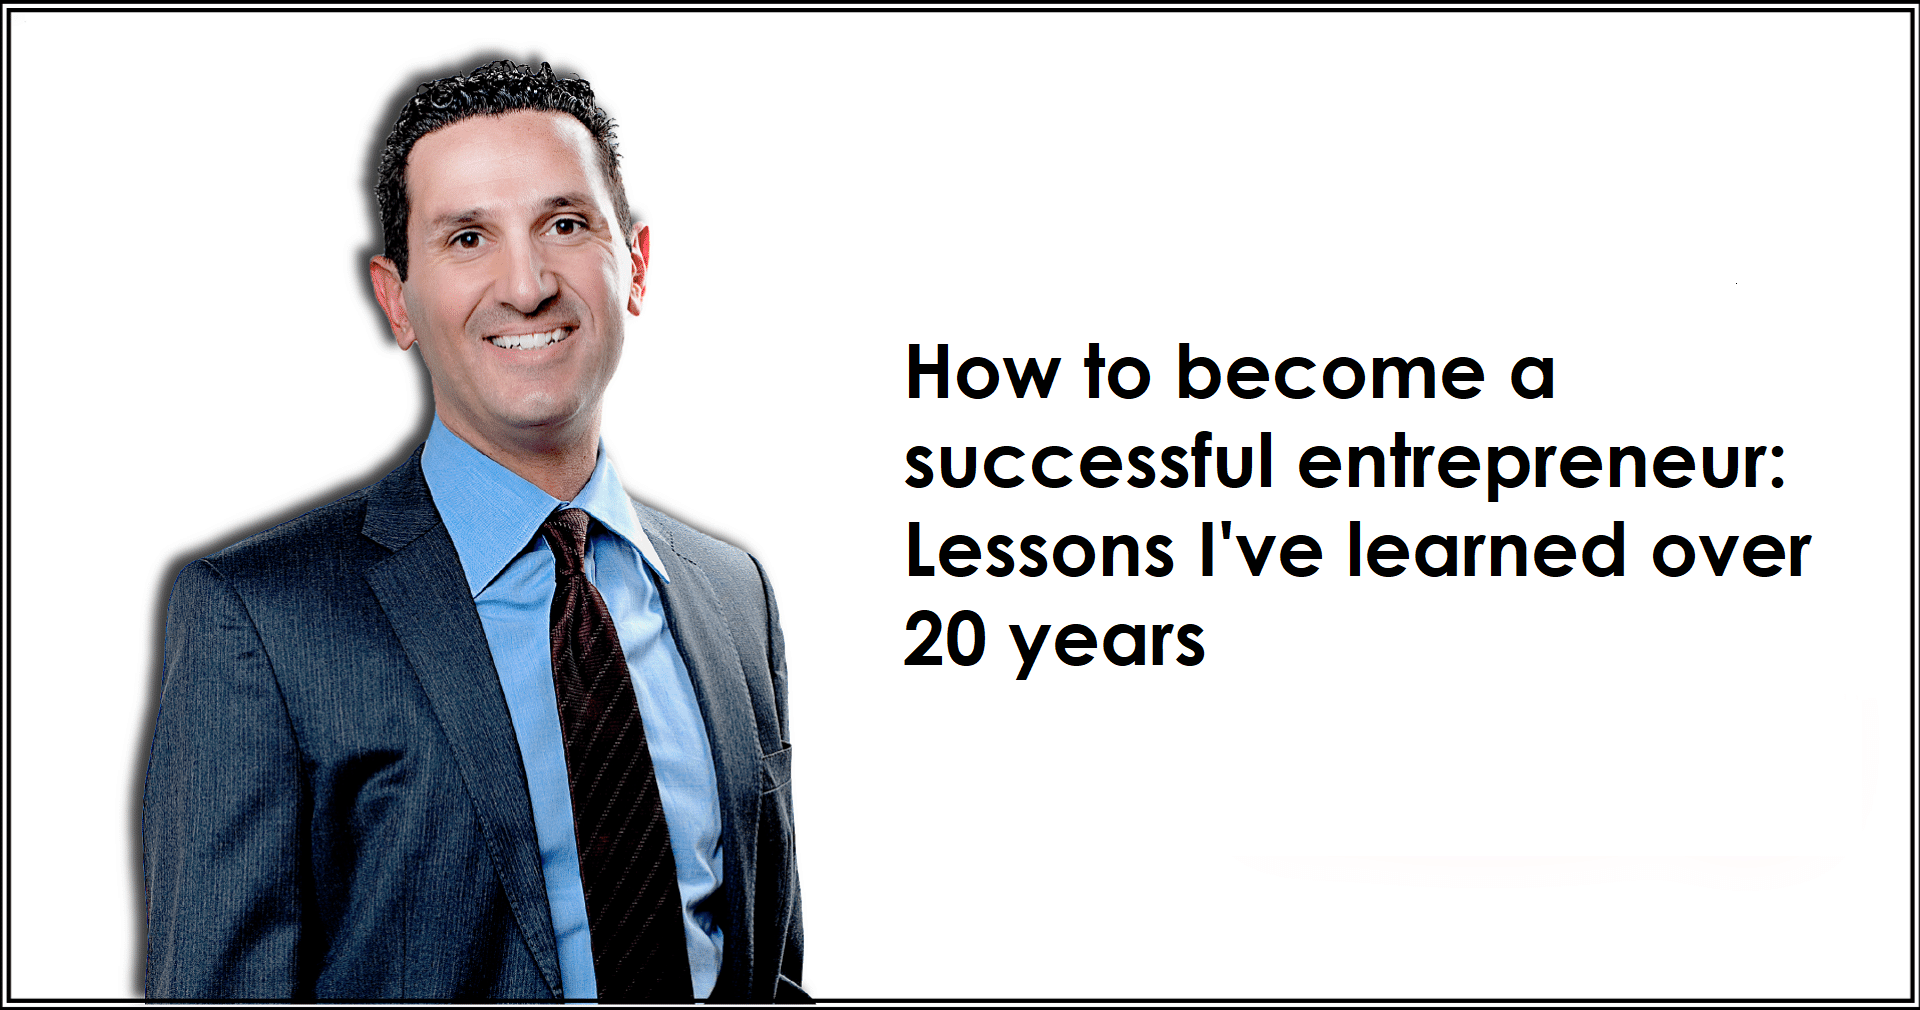 How to become a successful entrepreneur: Lessons I’ve learned over 20 years